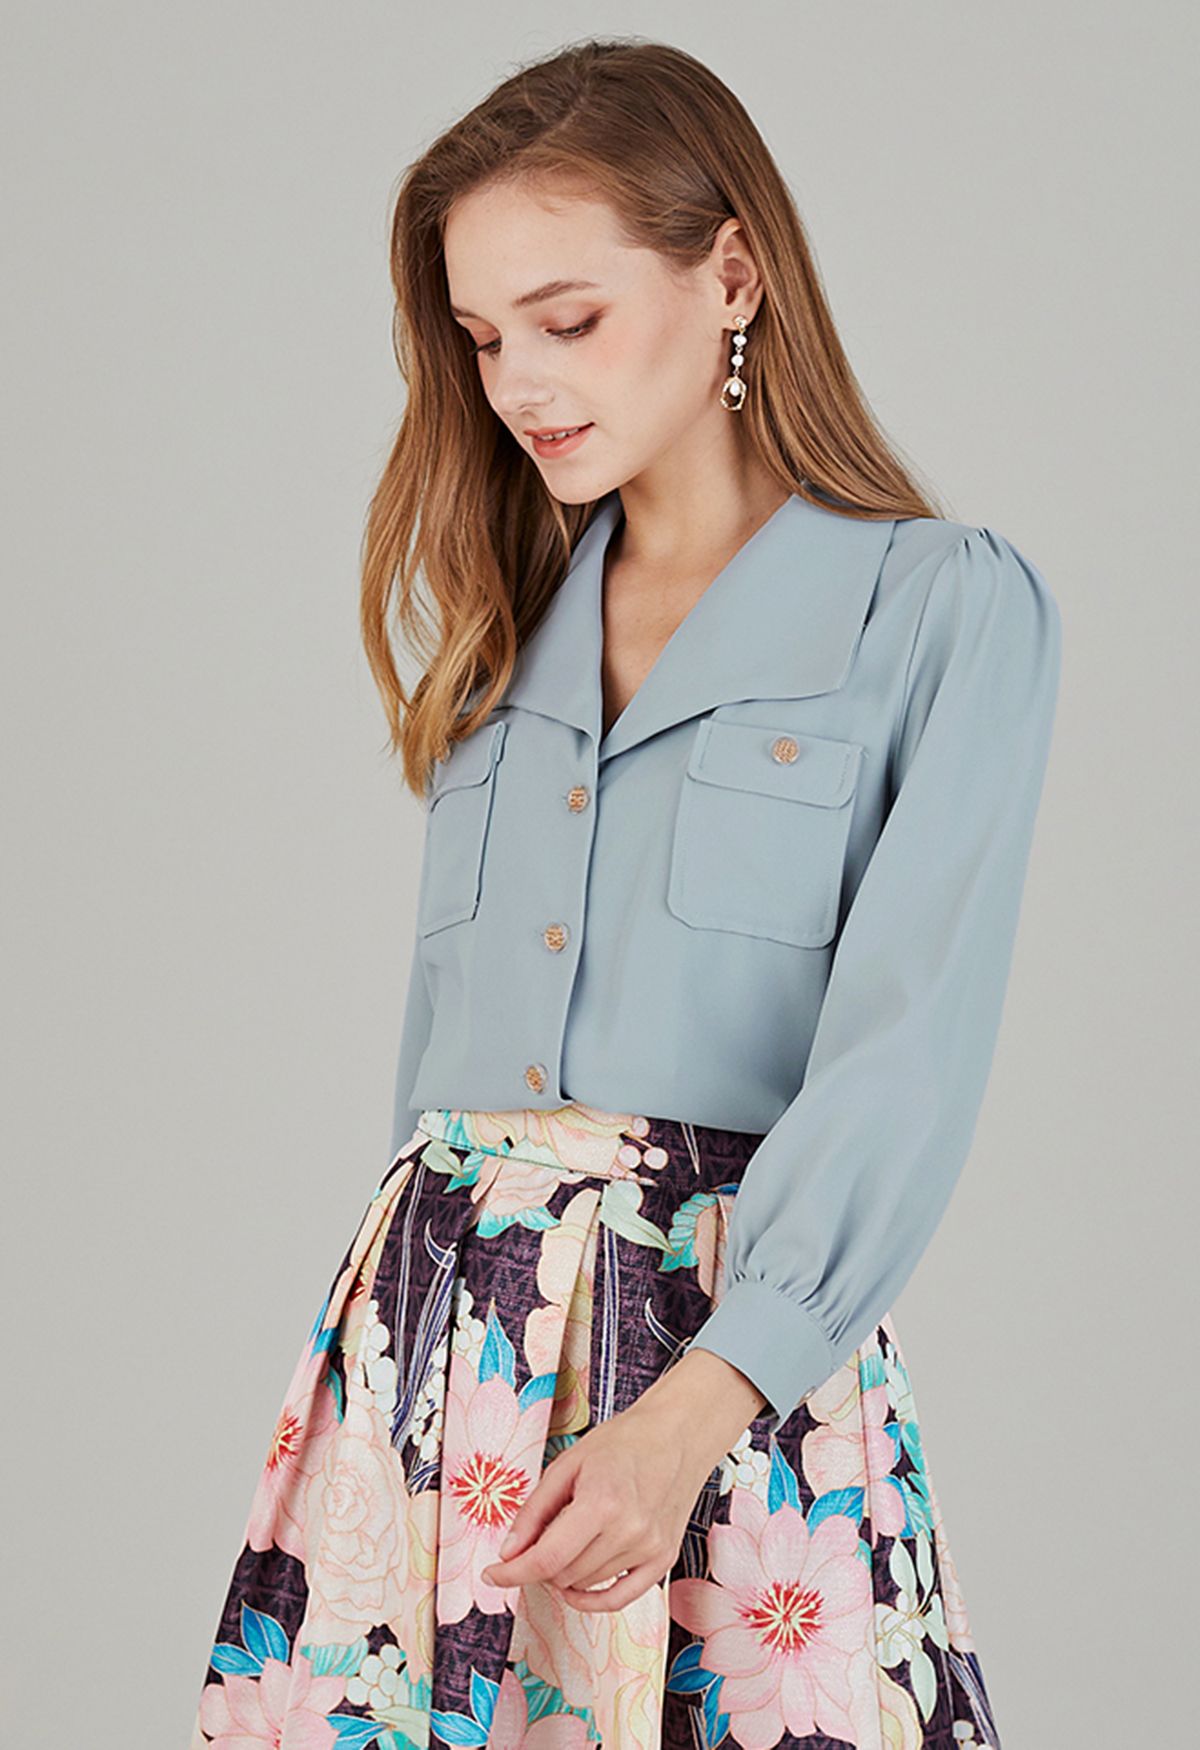 Pointed Collar Golden Button Shirt in Dusty Blue